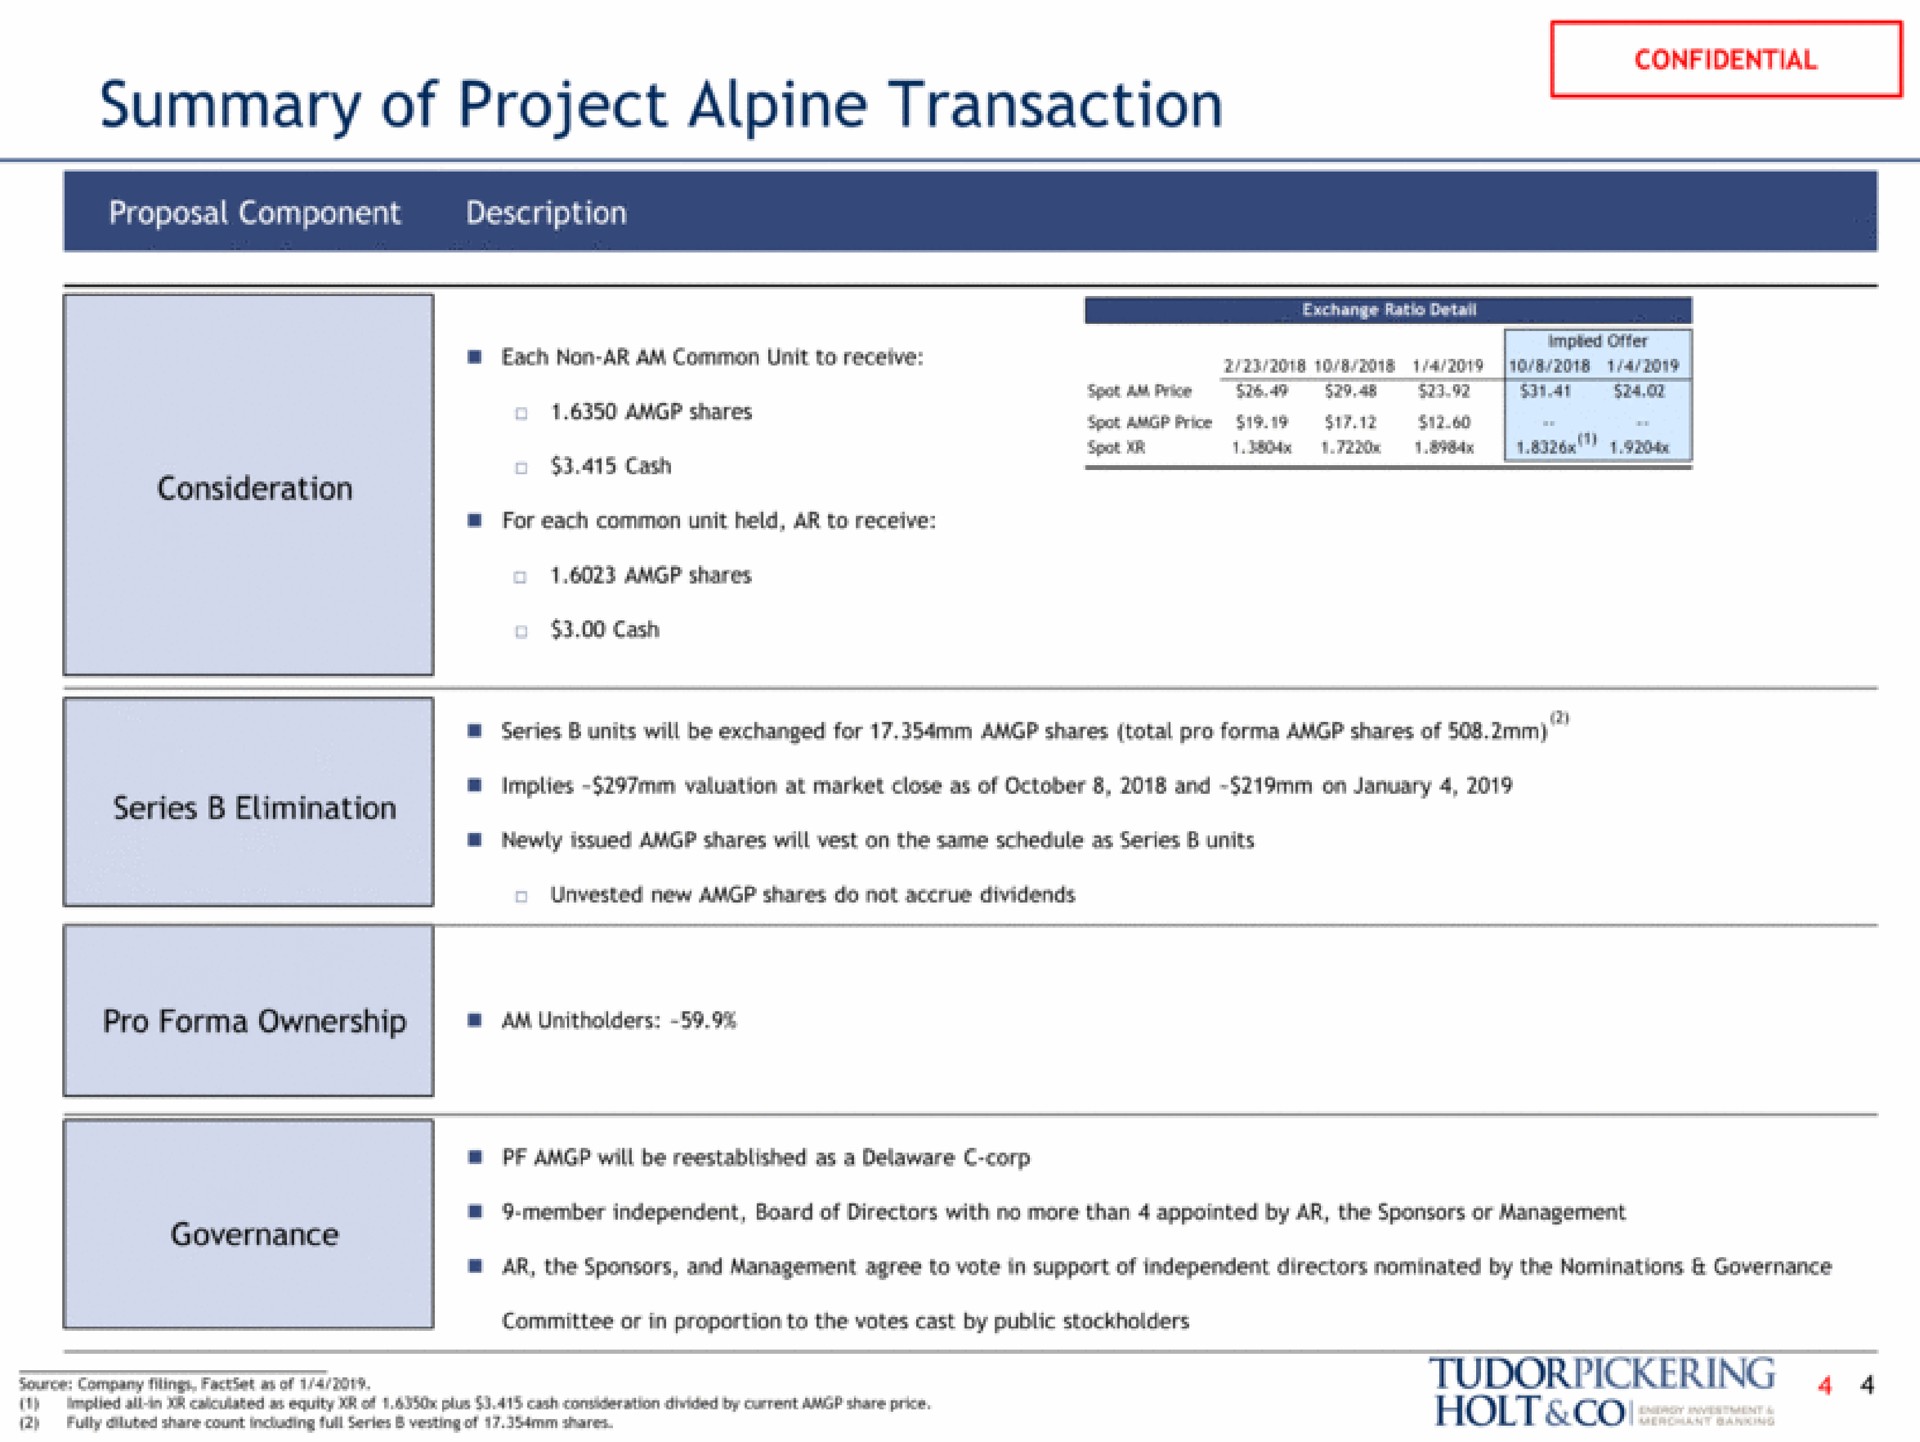 summary of project alpine transaction gin fears fully sare count series holt | Tudor, Pickering, Holt & Co